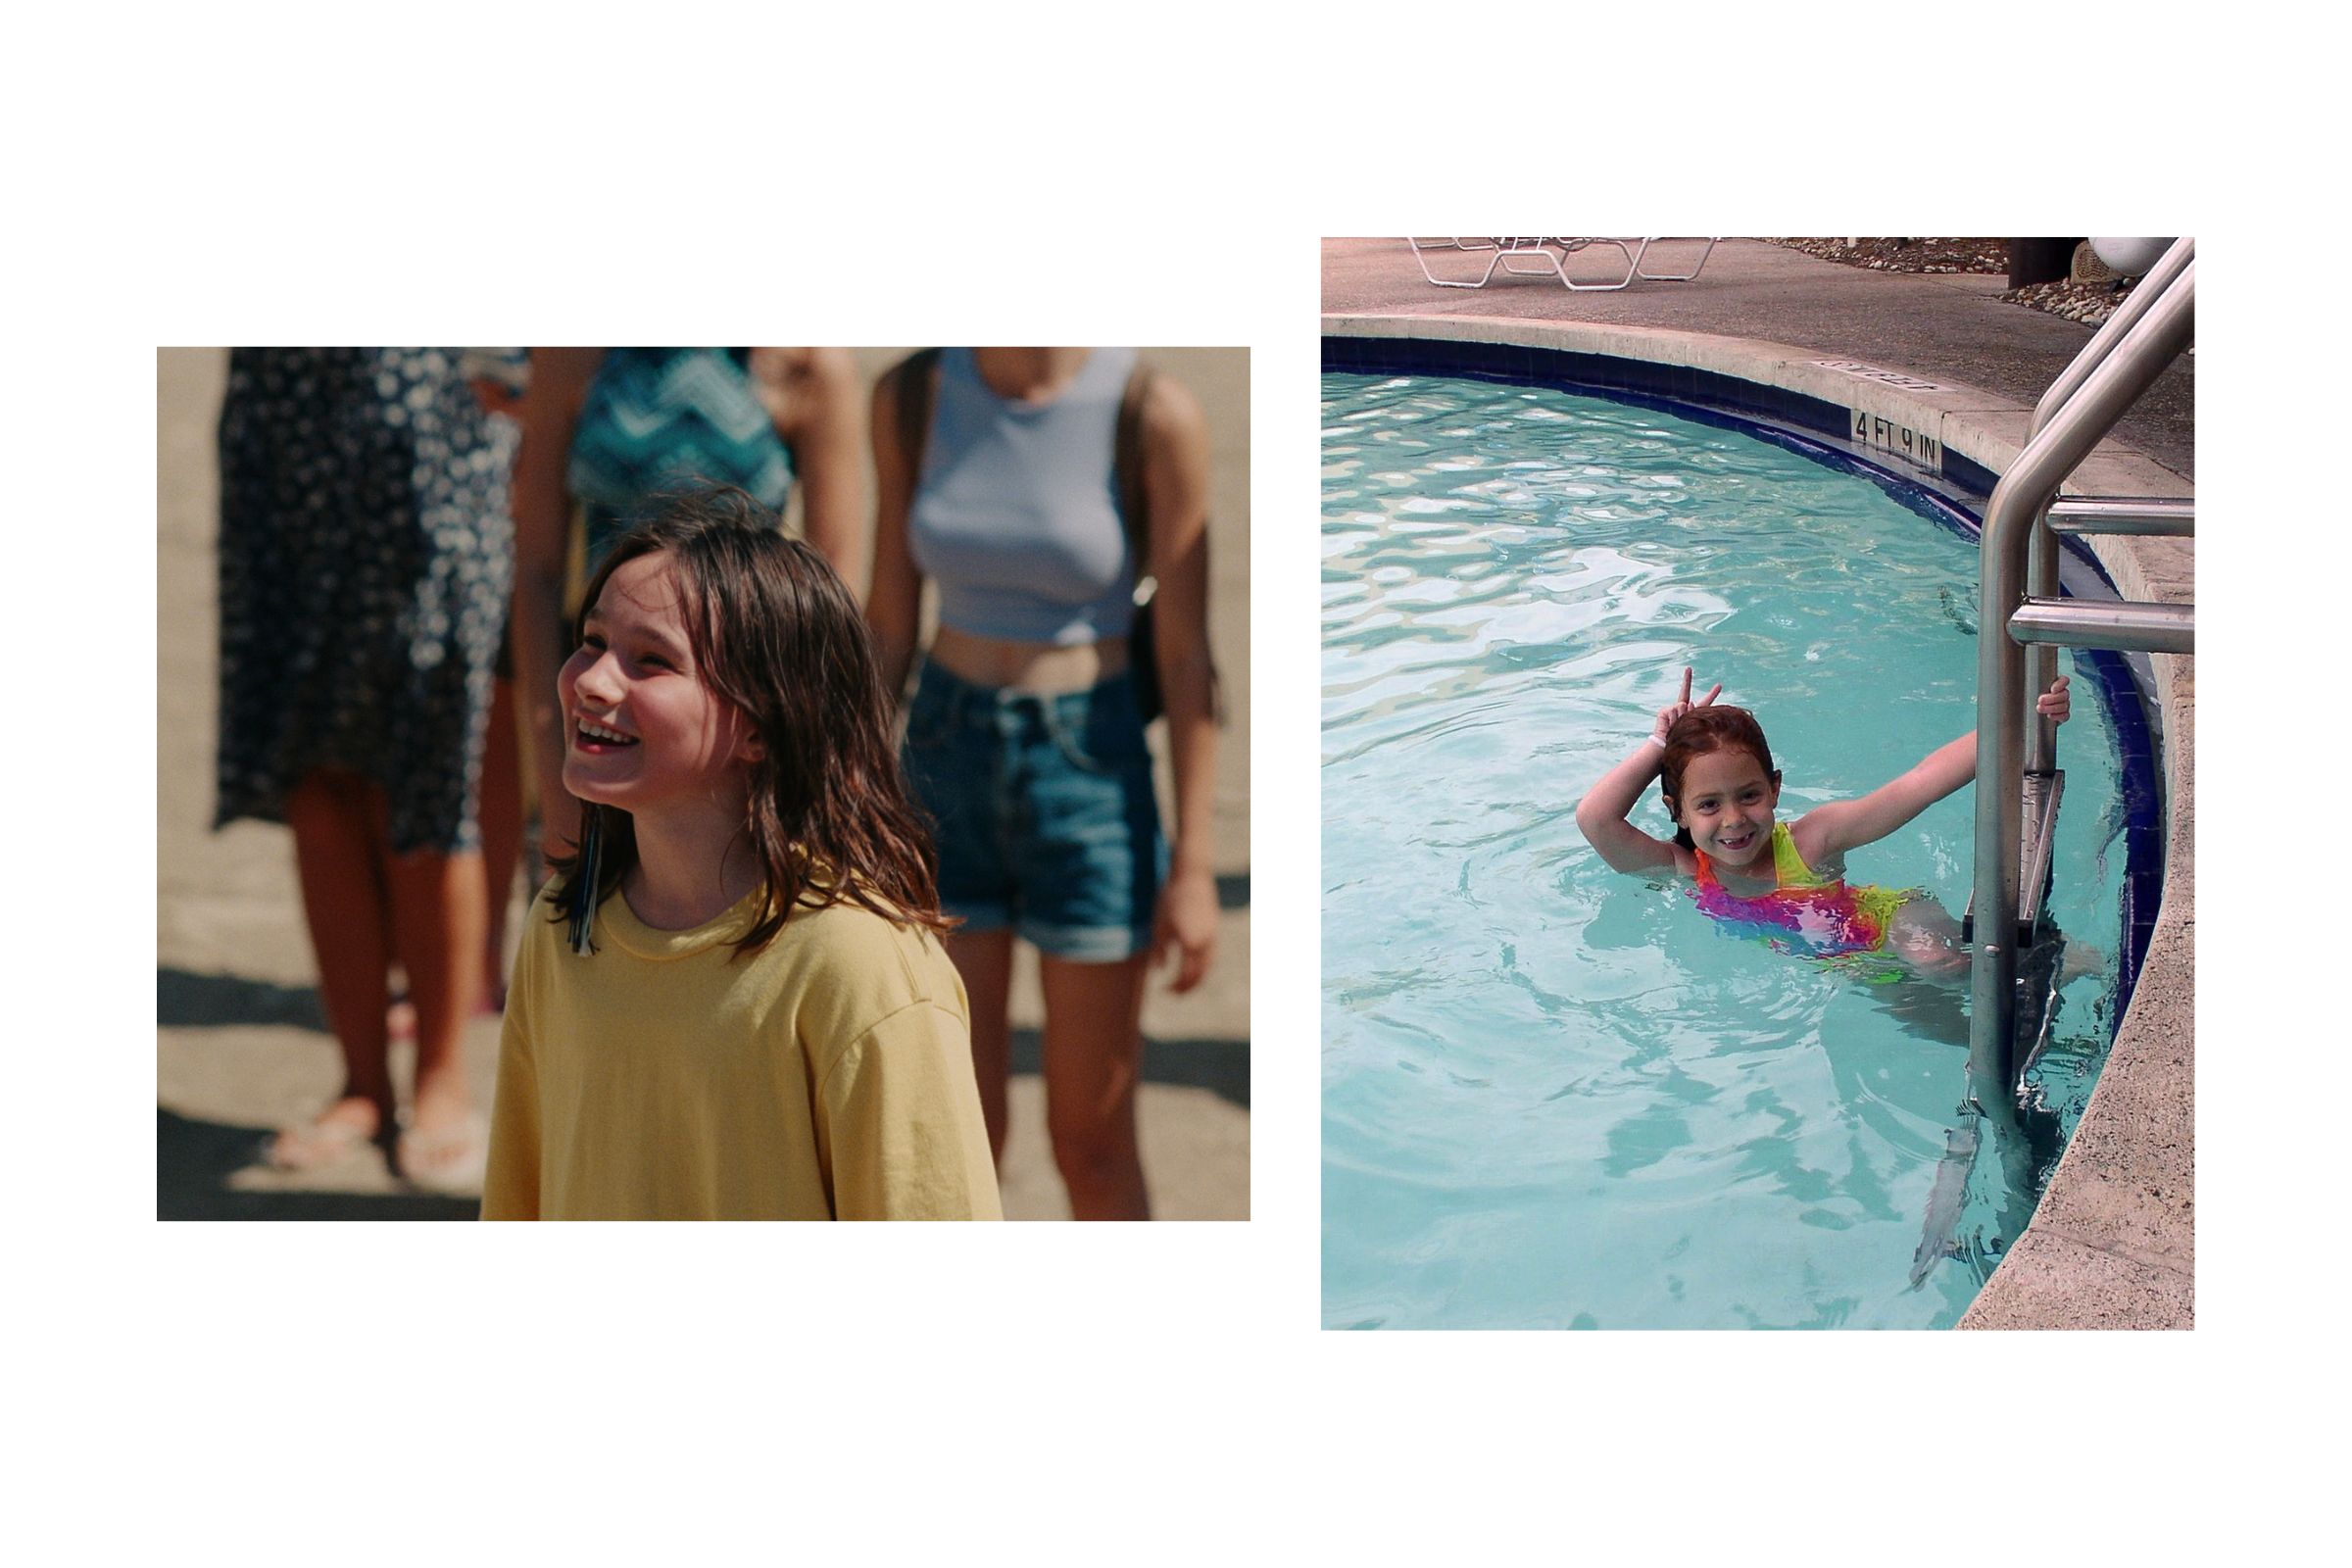 On the left, a girl in a baggy yellow T-shirt grins up at someone. On the right, a girl in a tie-dye one piece swimsuit gives herself bunny ears